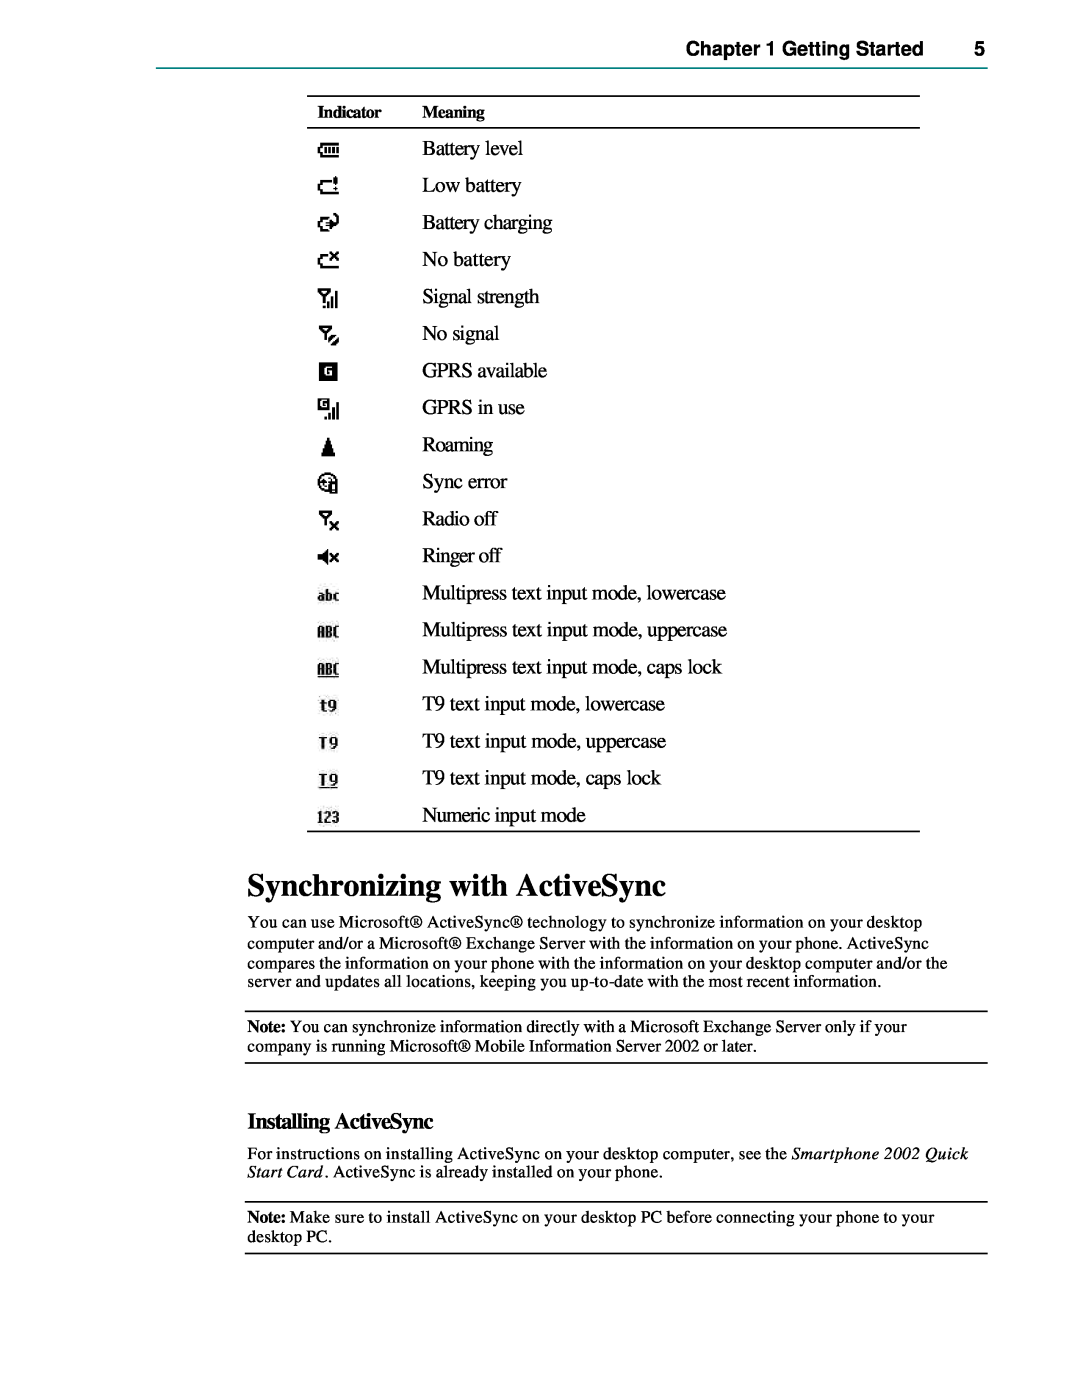 Microsoft Smartphone 2002 manual Synchronizing with ActiveSync, Installing ActiveSync, Getting Started, Indicator Meaning 